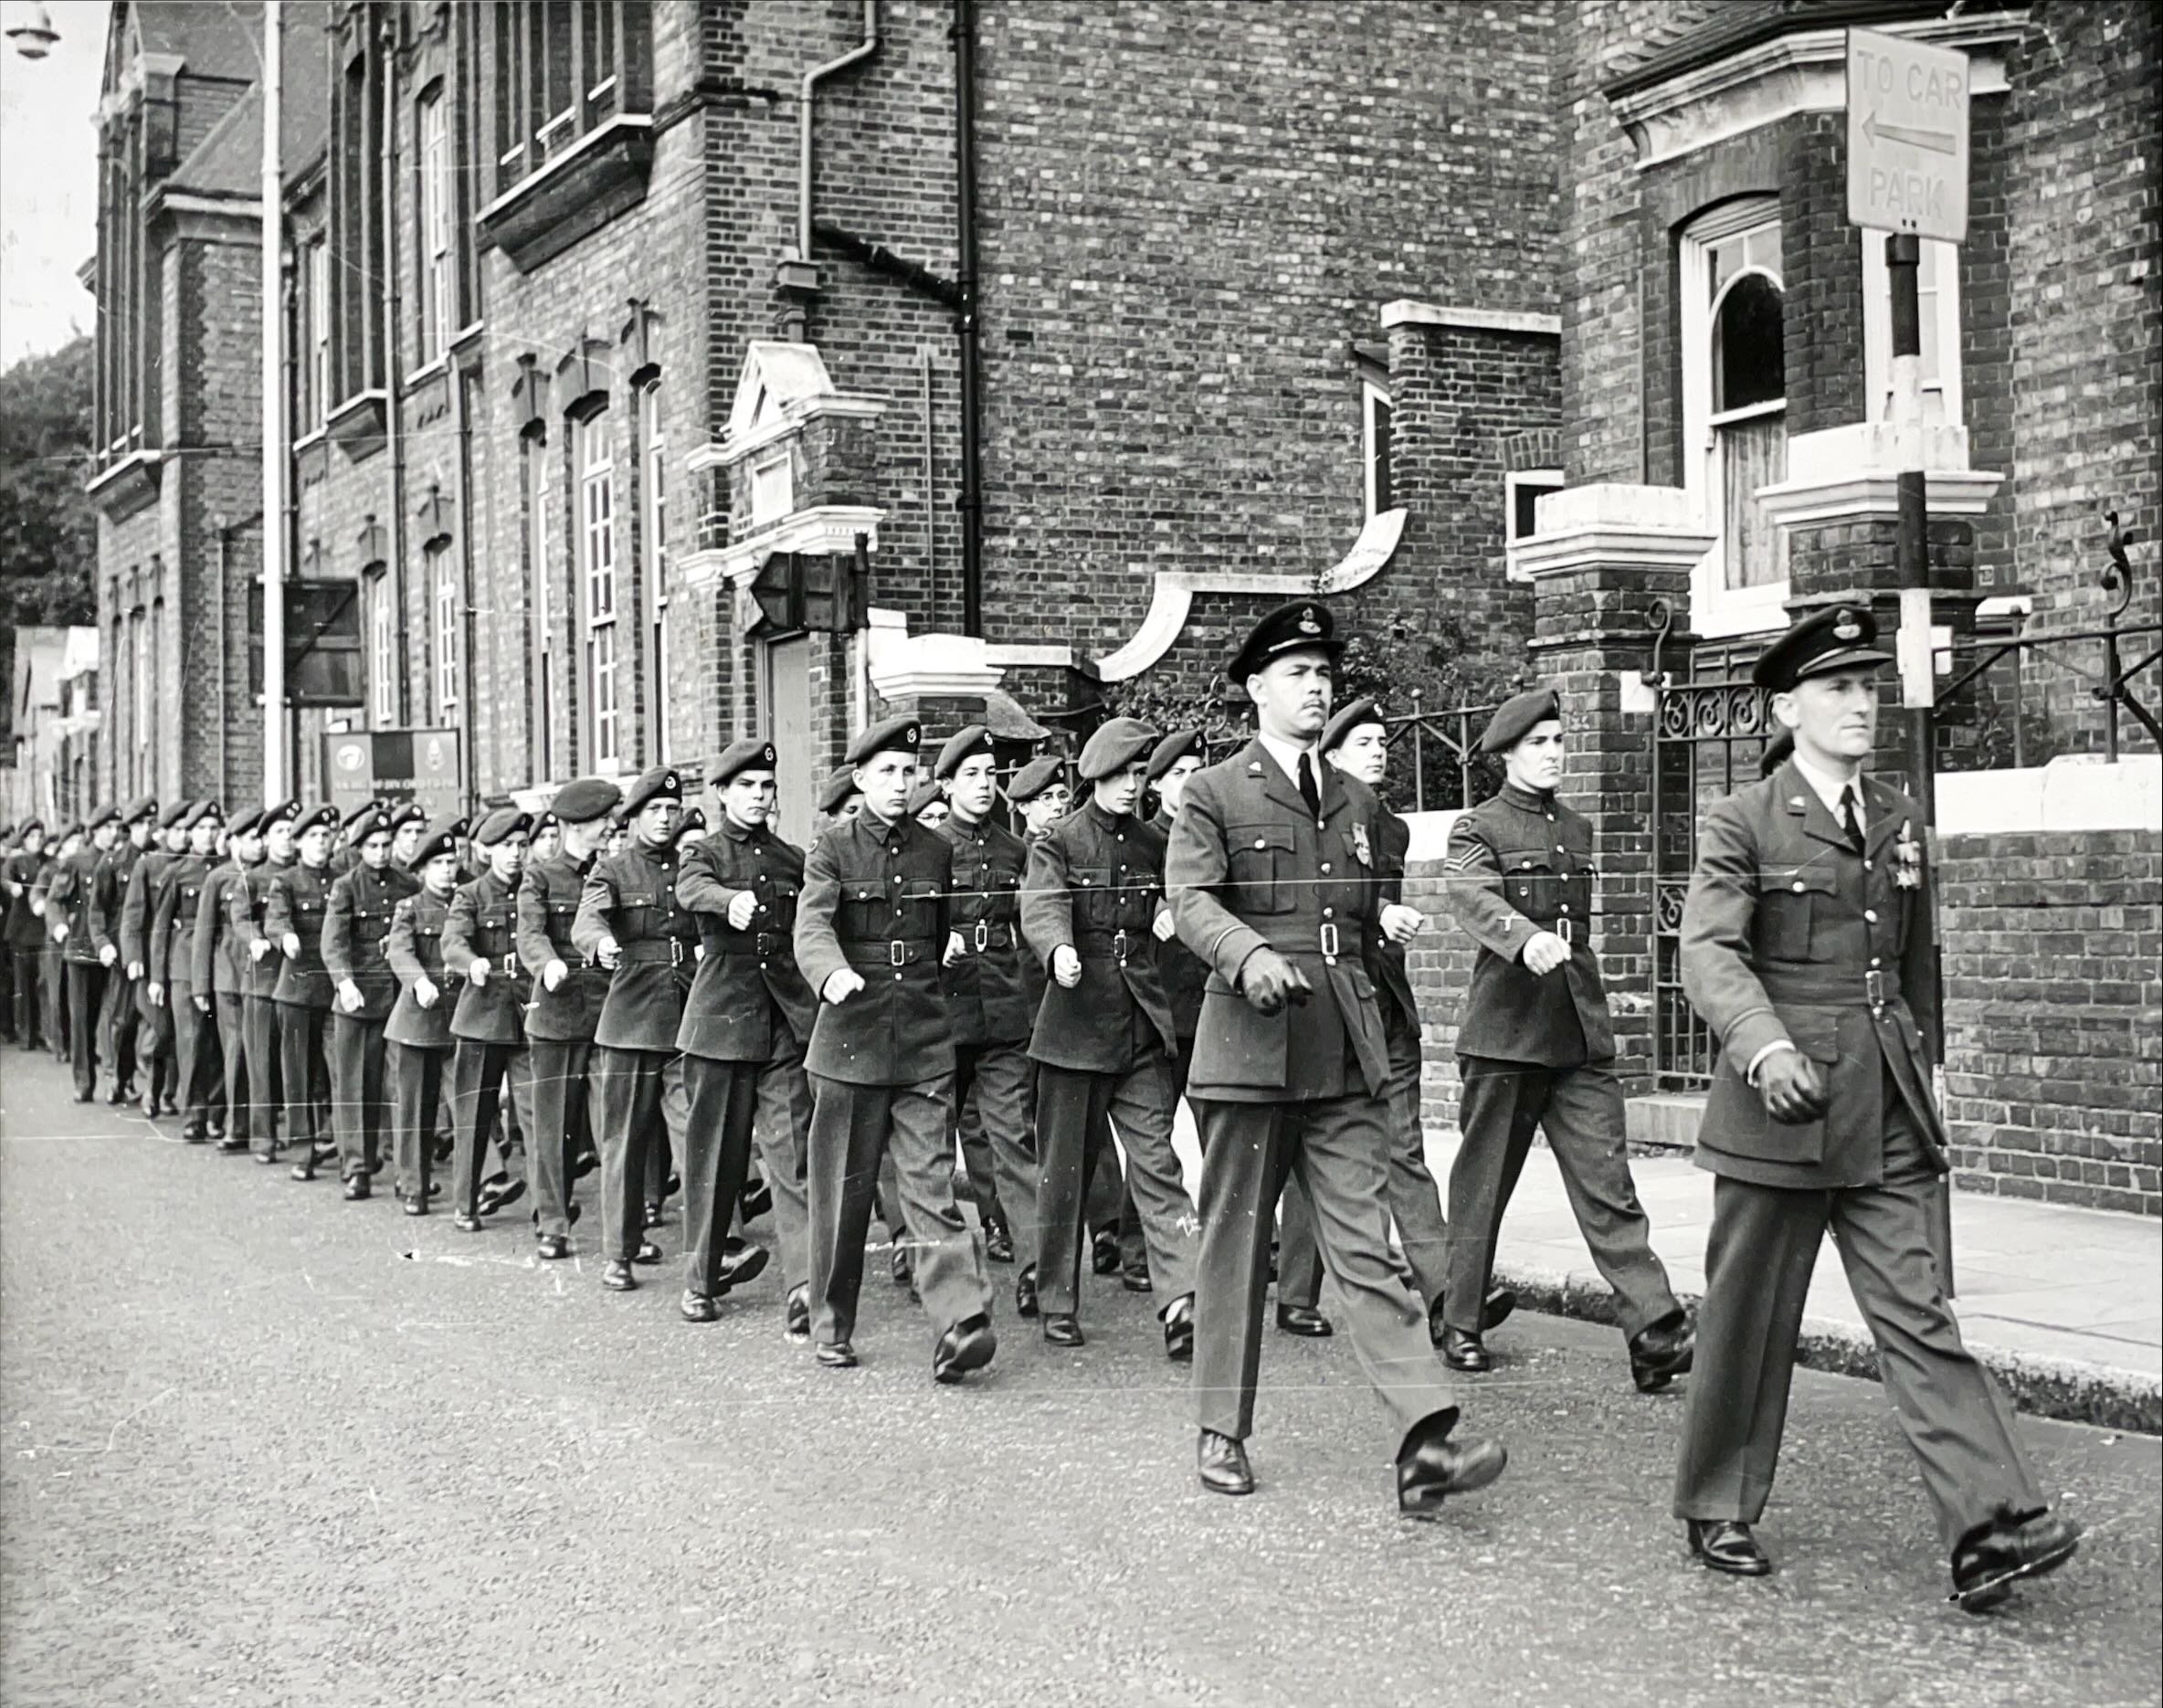 ATC Cadets marching to the Cathedrsal, September 1954